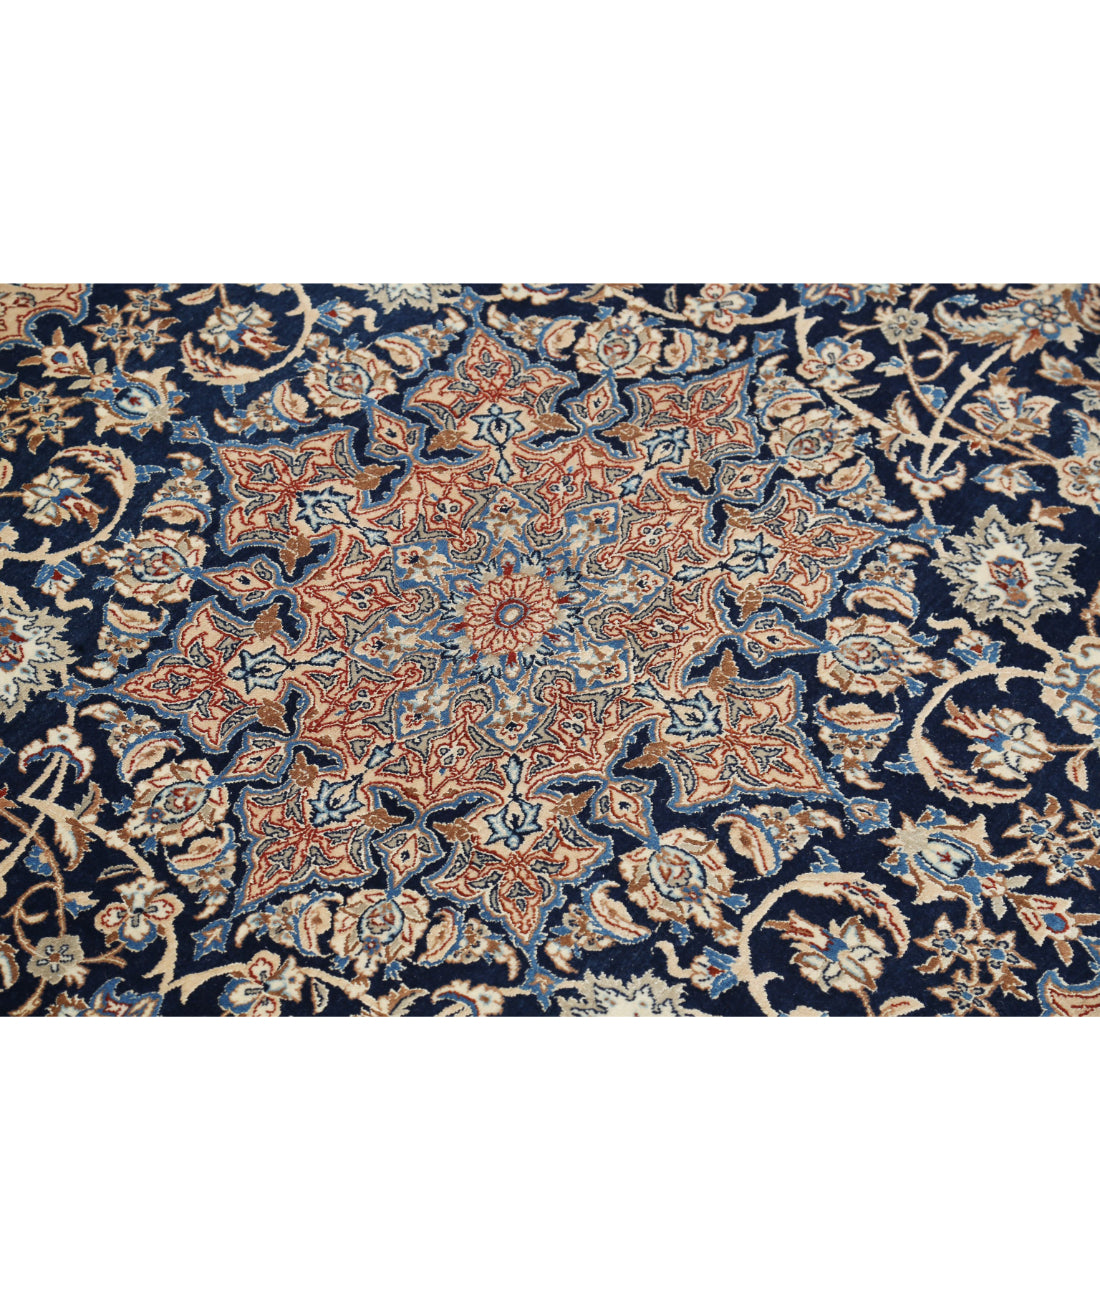 Hand Knotted Masterpiece Persian Nain Wool & Silk Rug - 5'11'' x 9'9'' 5'11'' x 9'9'' (178 X 293) / Blue / Ivory